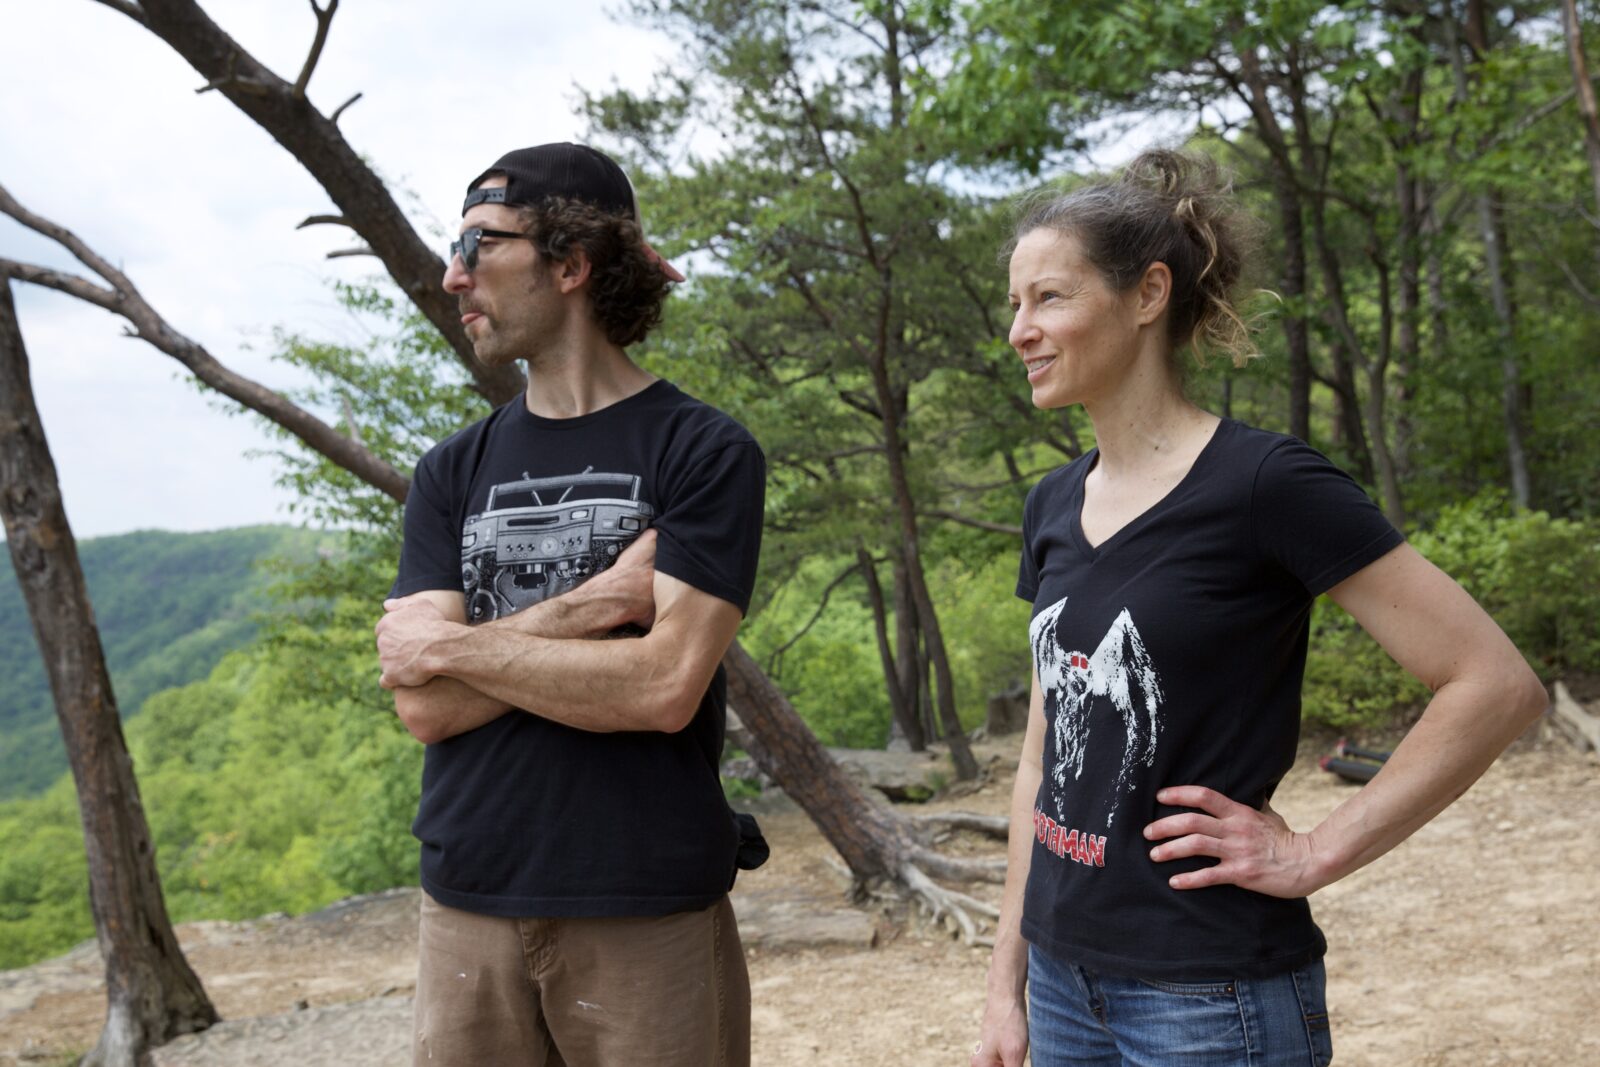 Kevin Umbel, left, and Karen Domzalski, right, at New River Gorge National Park in West Virginia on Sunday, May 24. They both settled in West Virginia from other states. (Photograph by Carmen Gentile)